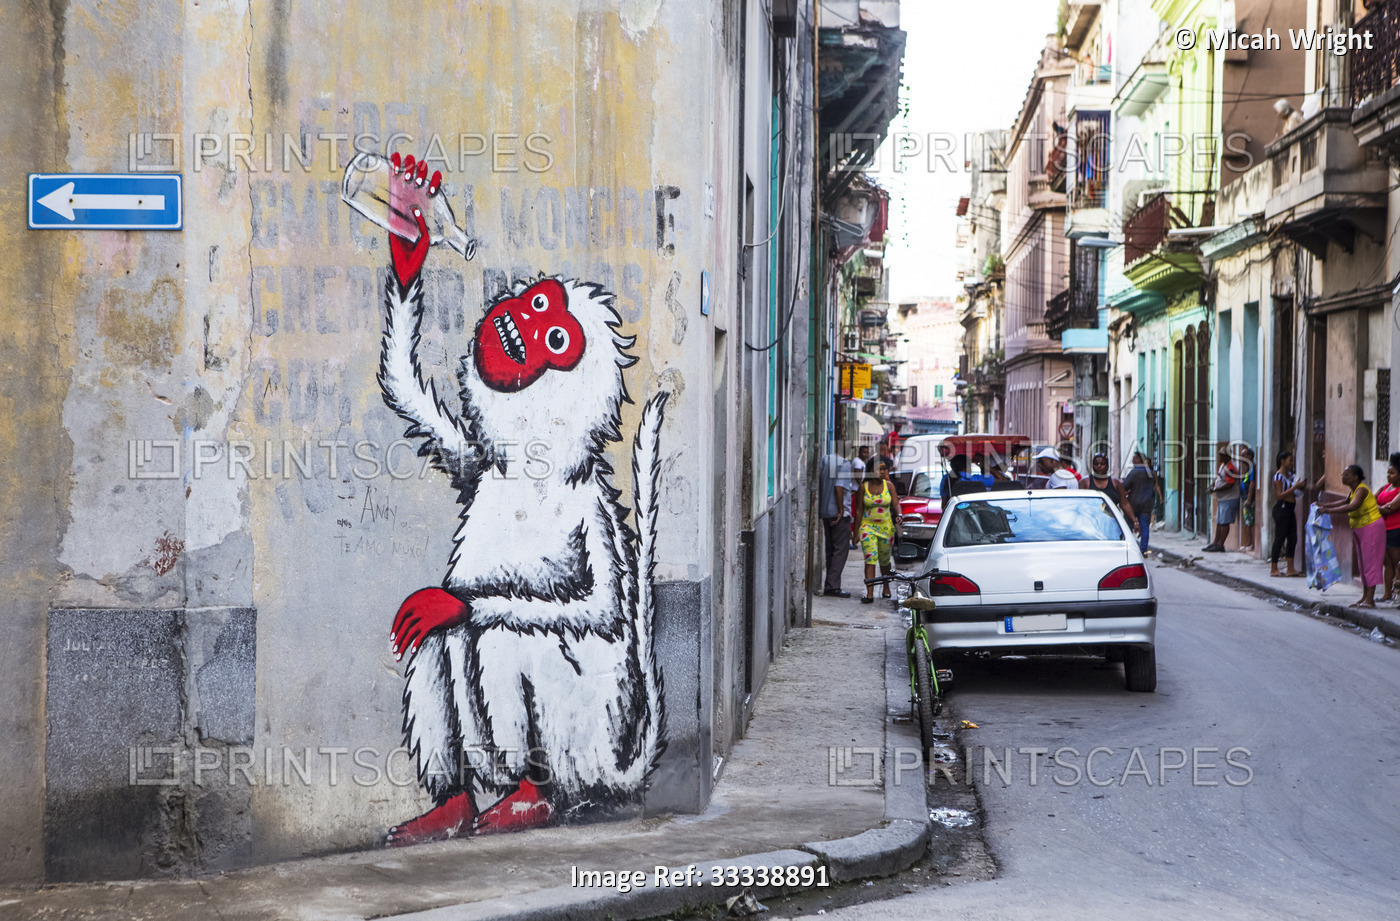 Street scenes through the old city of Havana, with graffiti painted on the ...